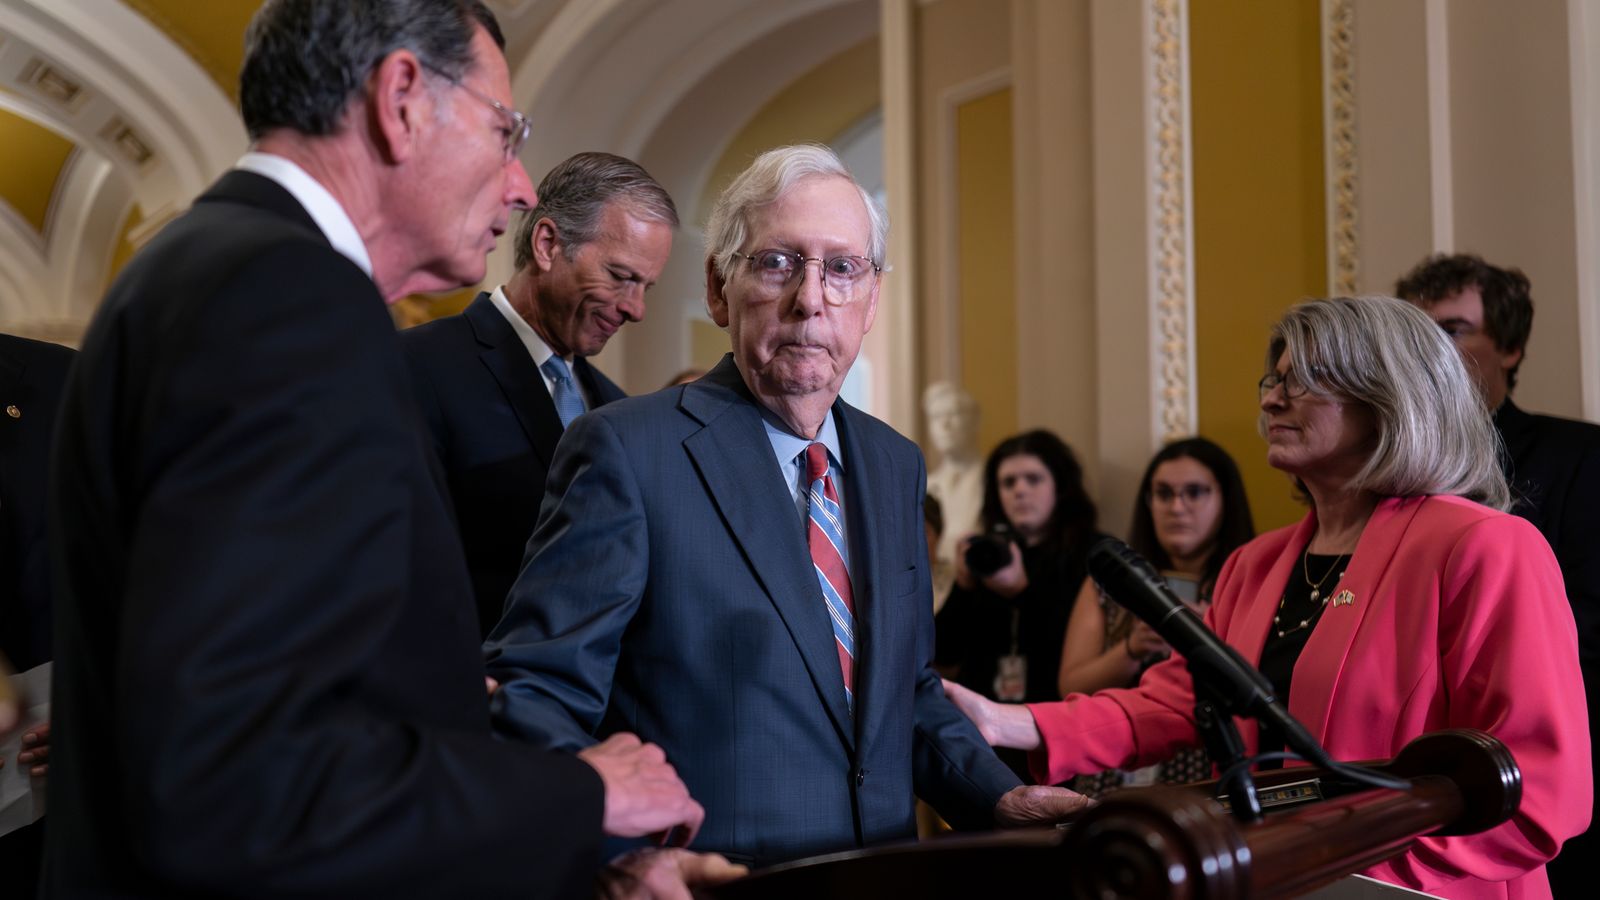 Senate Republican leader Mitch McConnell freezes midsentence and